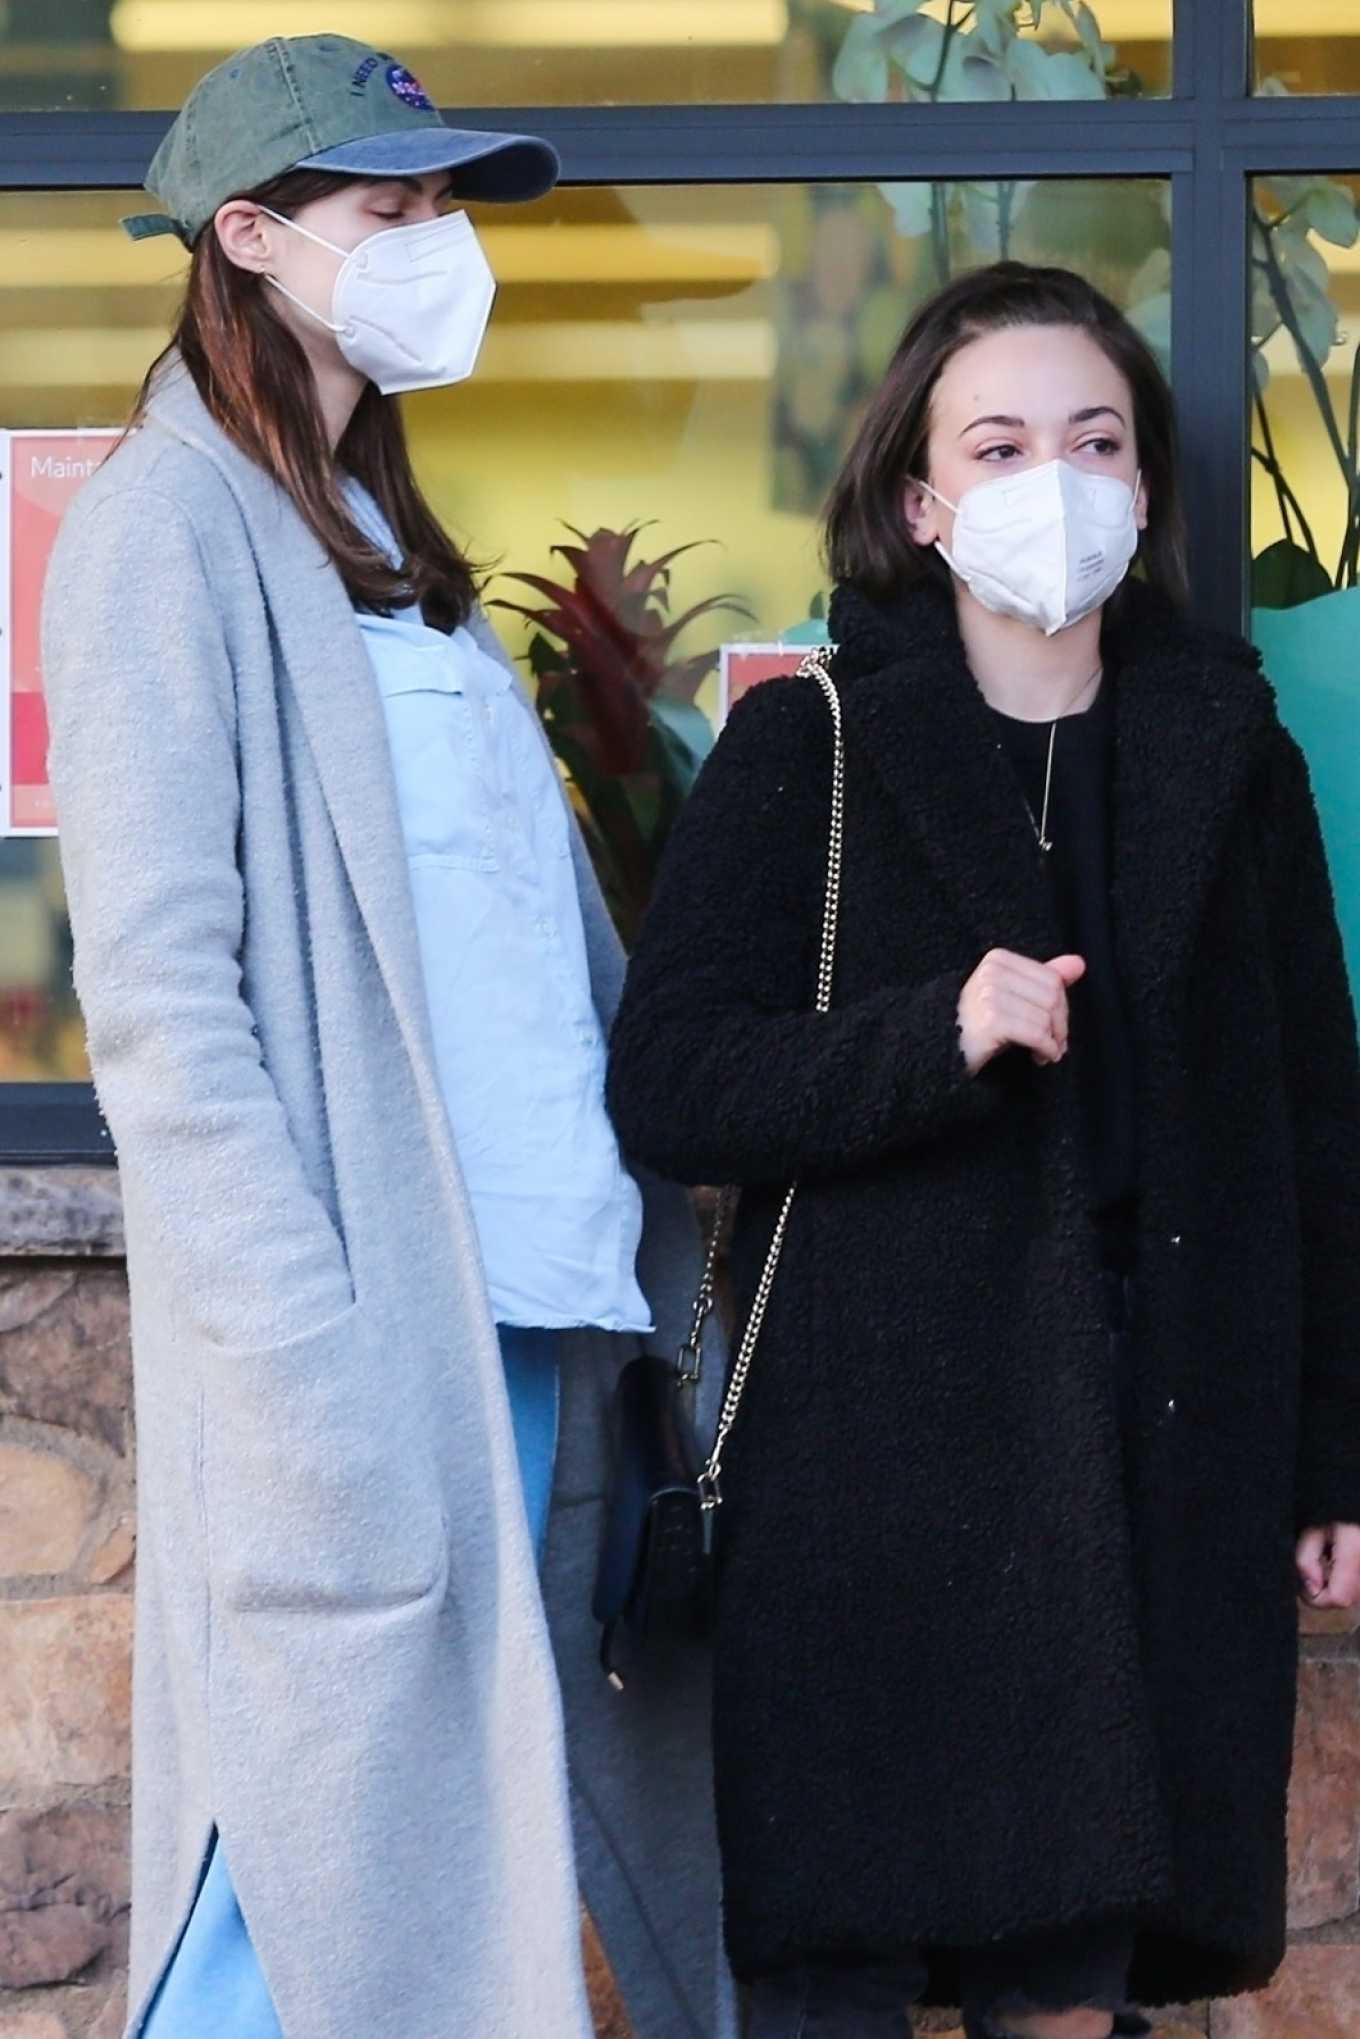 Alexandra Daddario â€“ Dons a face mask while shopping in Los Angeles